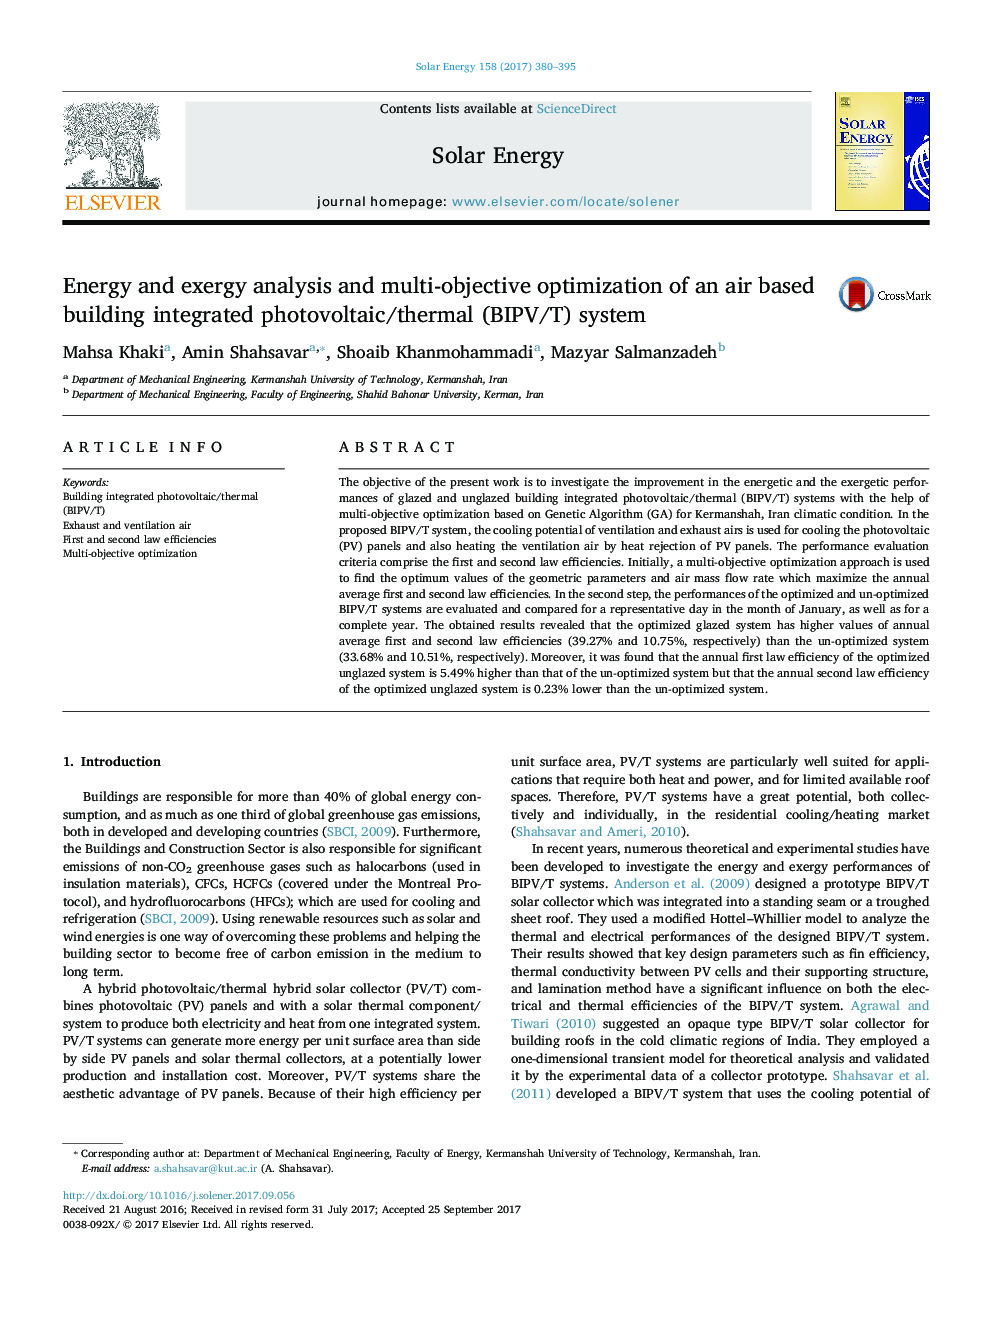 Energy and exergy analysis and multi-objective optimization of an air based building integrated photovoltaic/thermal (BIPV/T) system